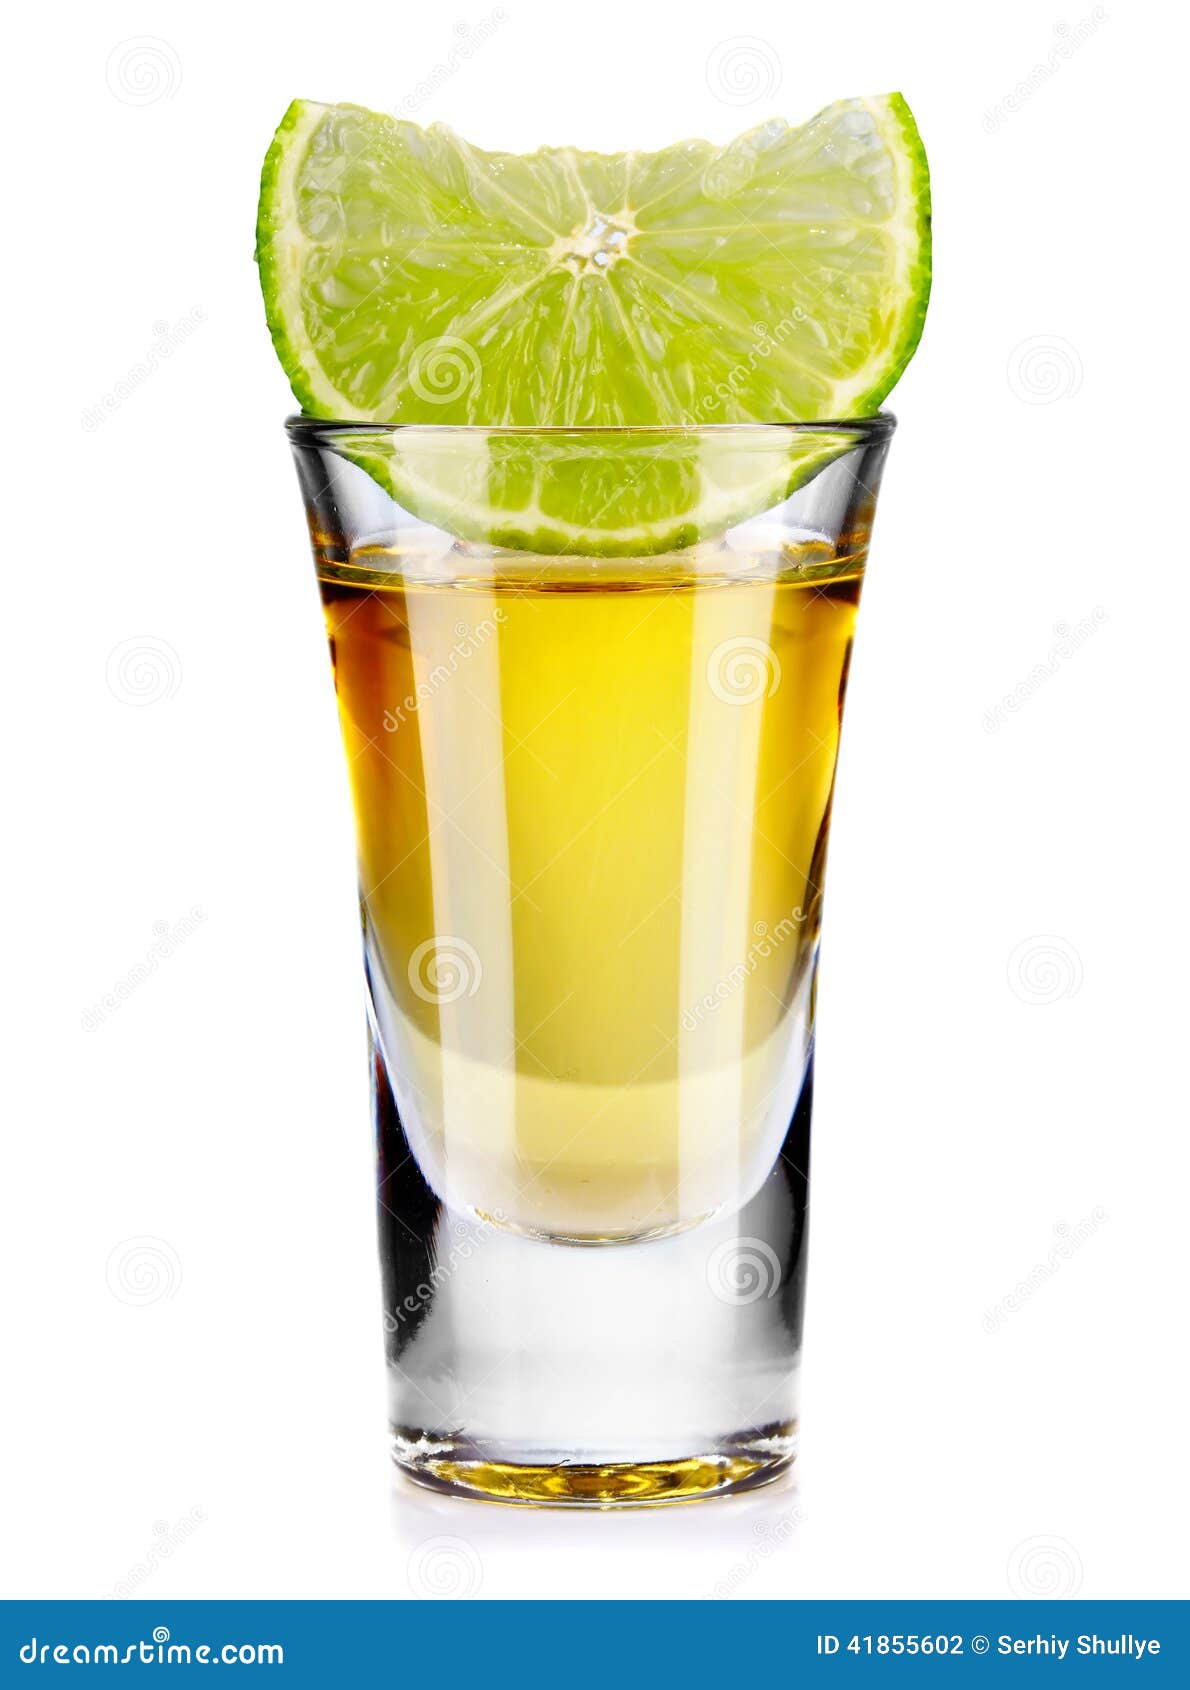 gold tequila shot with lime  on white